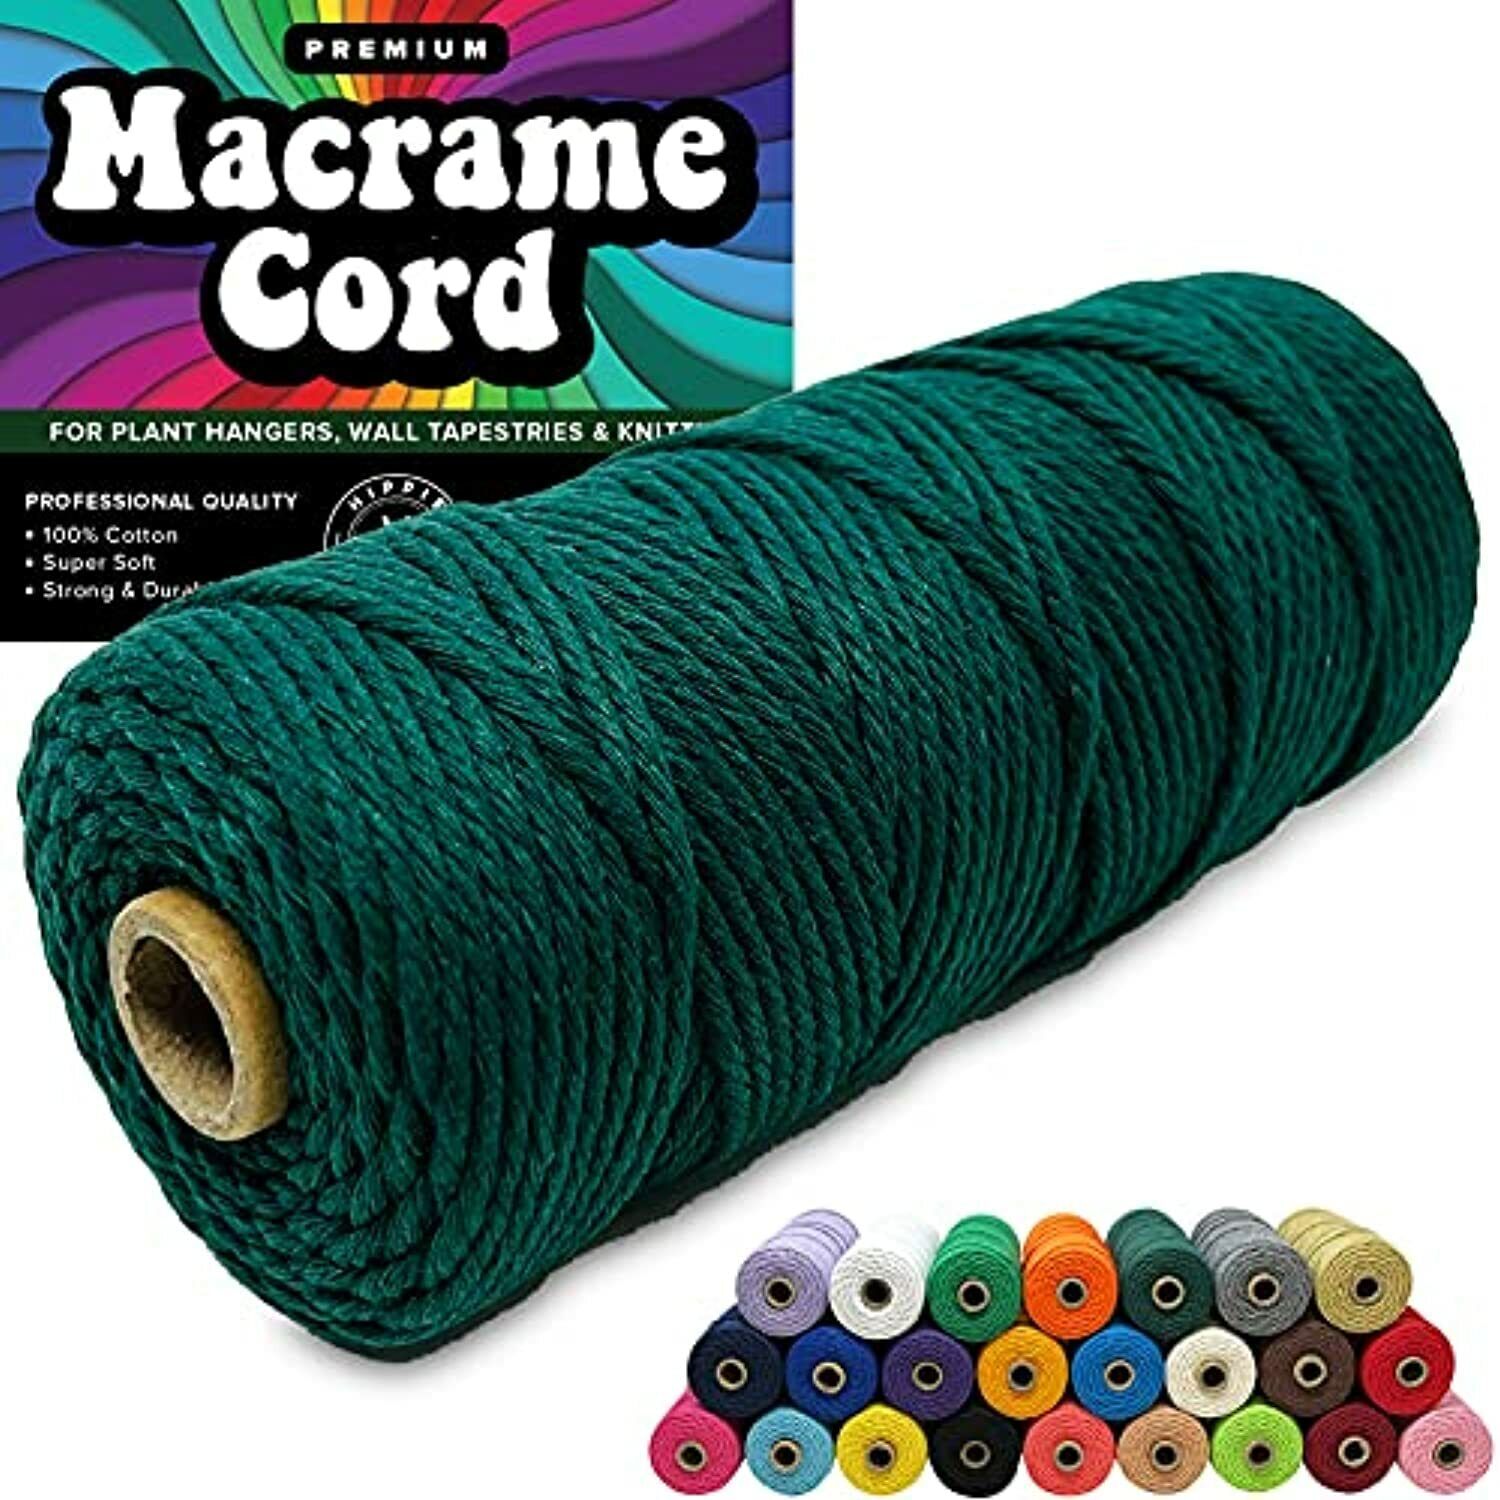 100% Cotton Cord Rope for Macrame 3mm Natural and Colored Craft String Yarn